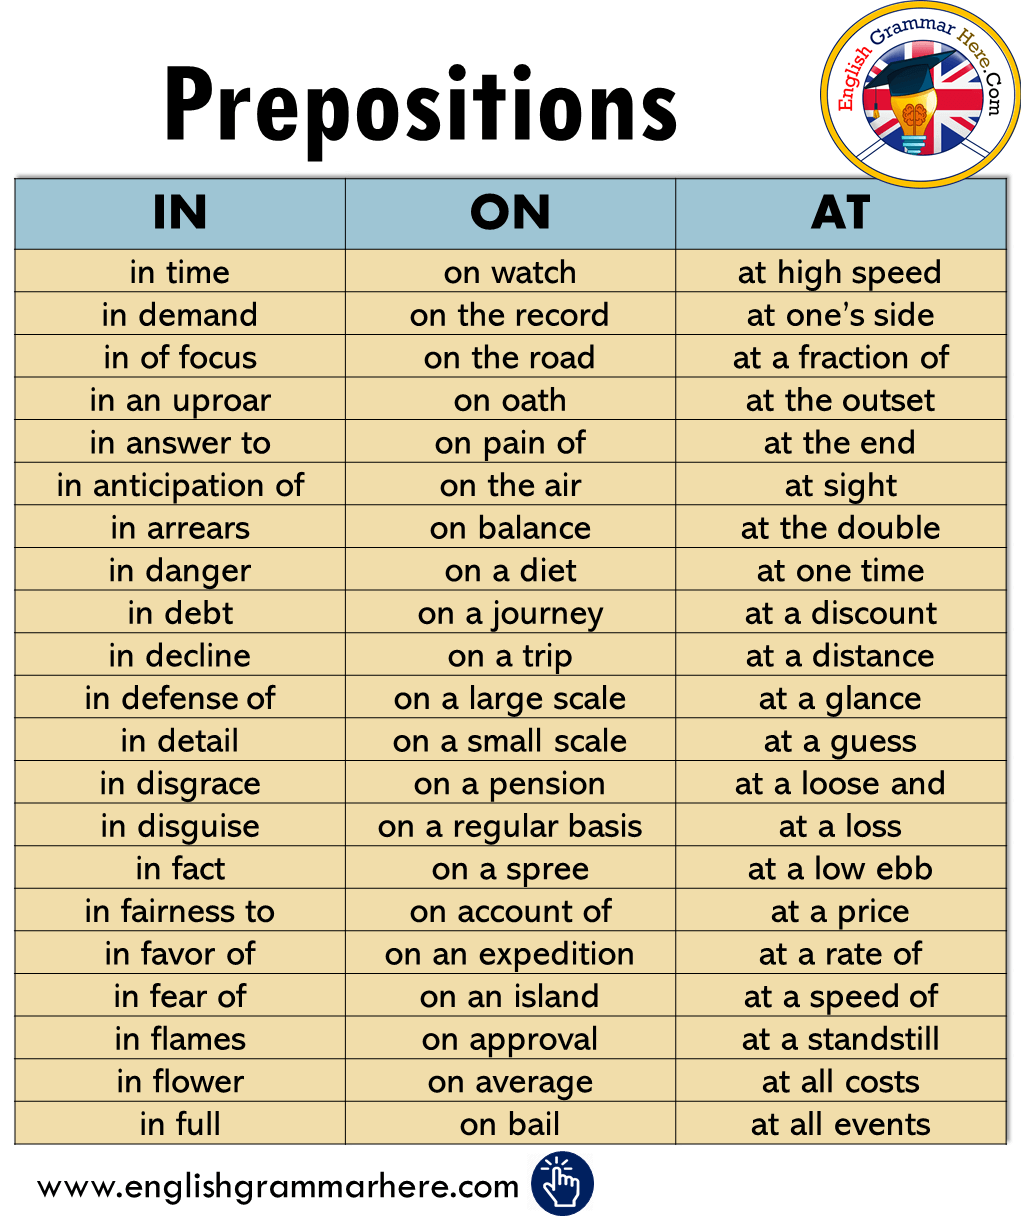 Prepositions; At, In, On